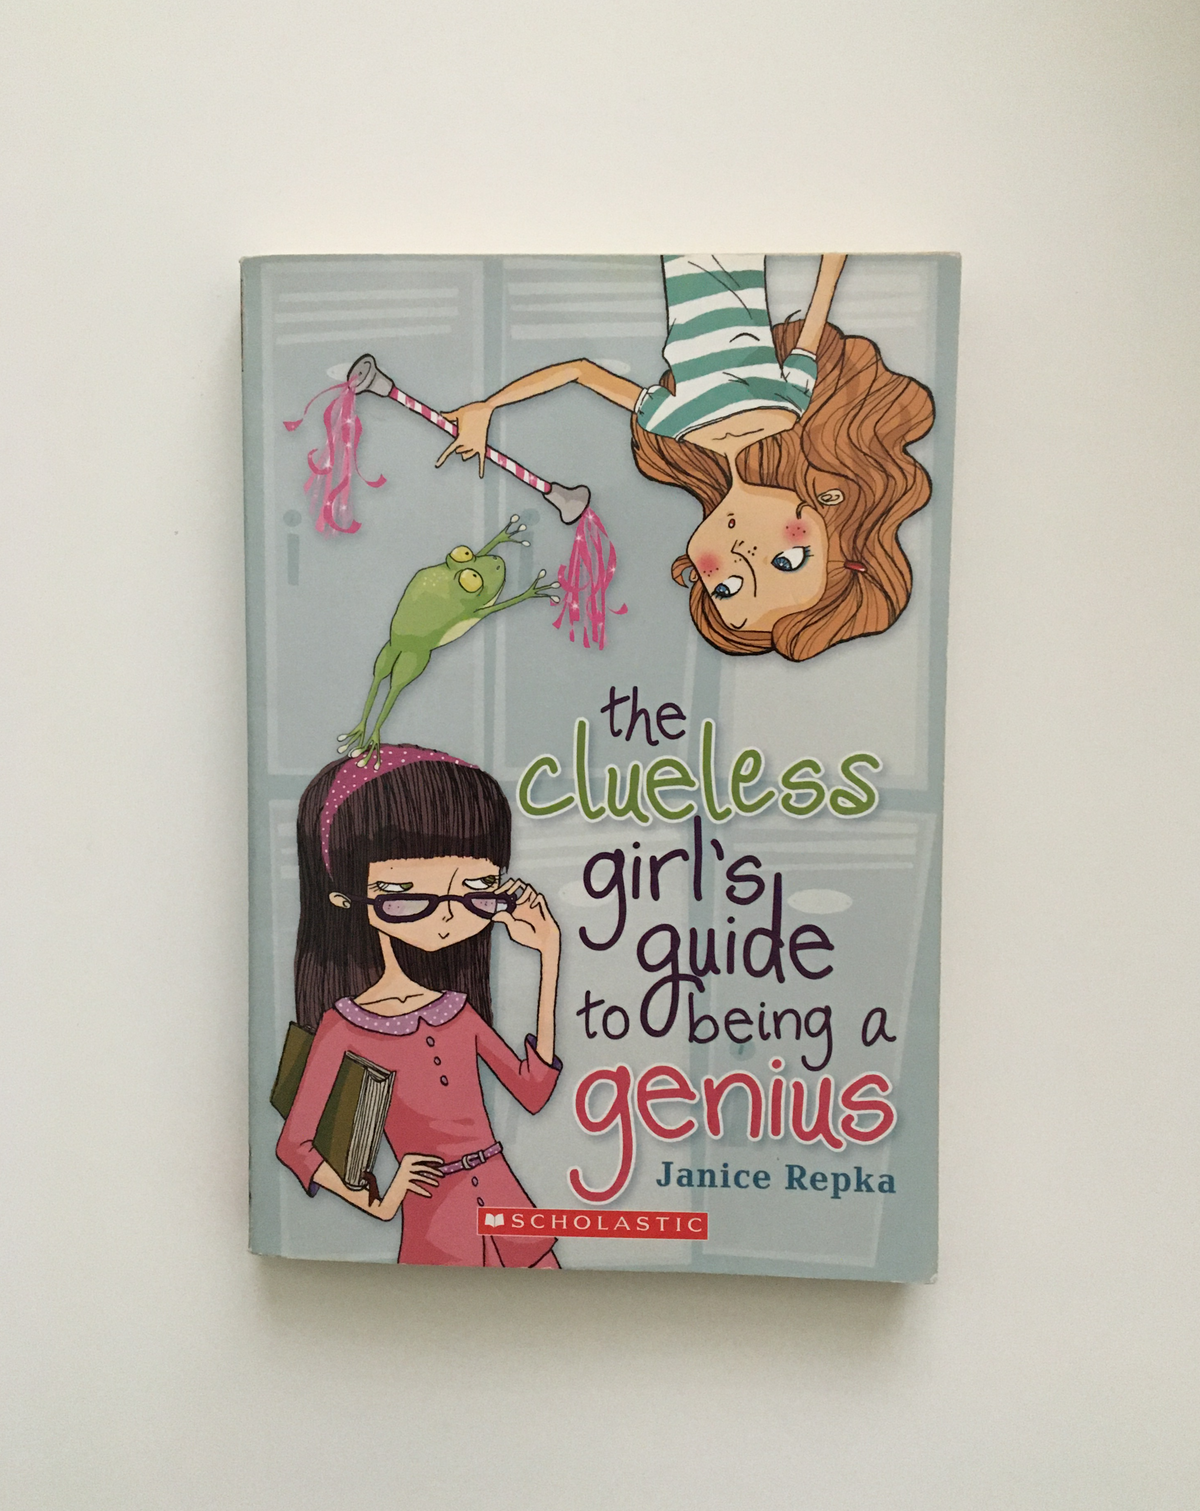 The Clueless Girl&#39;s Guide to Being a Genius by Janice Repka, book, Ten Dollar Books, Ten Dollar Books